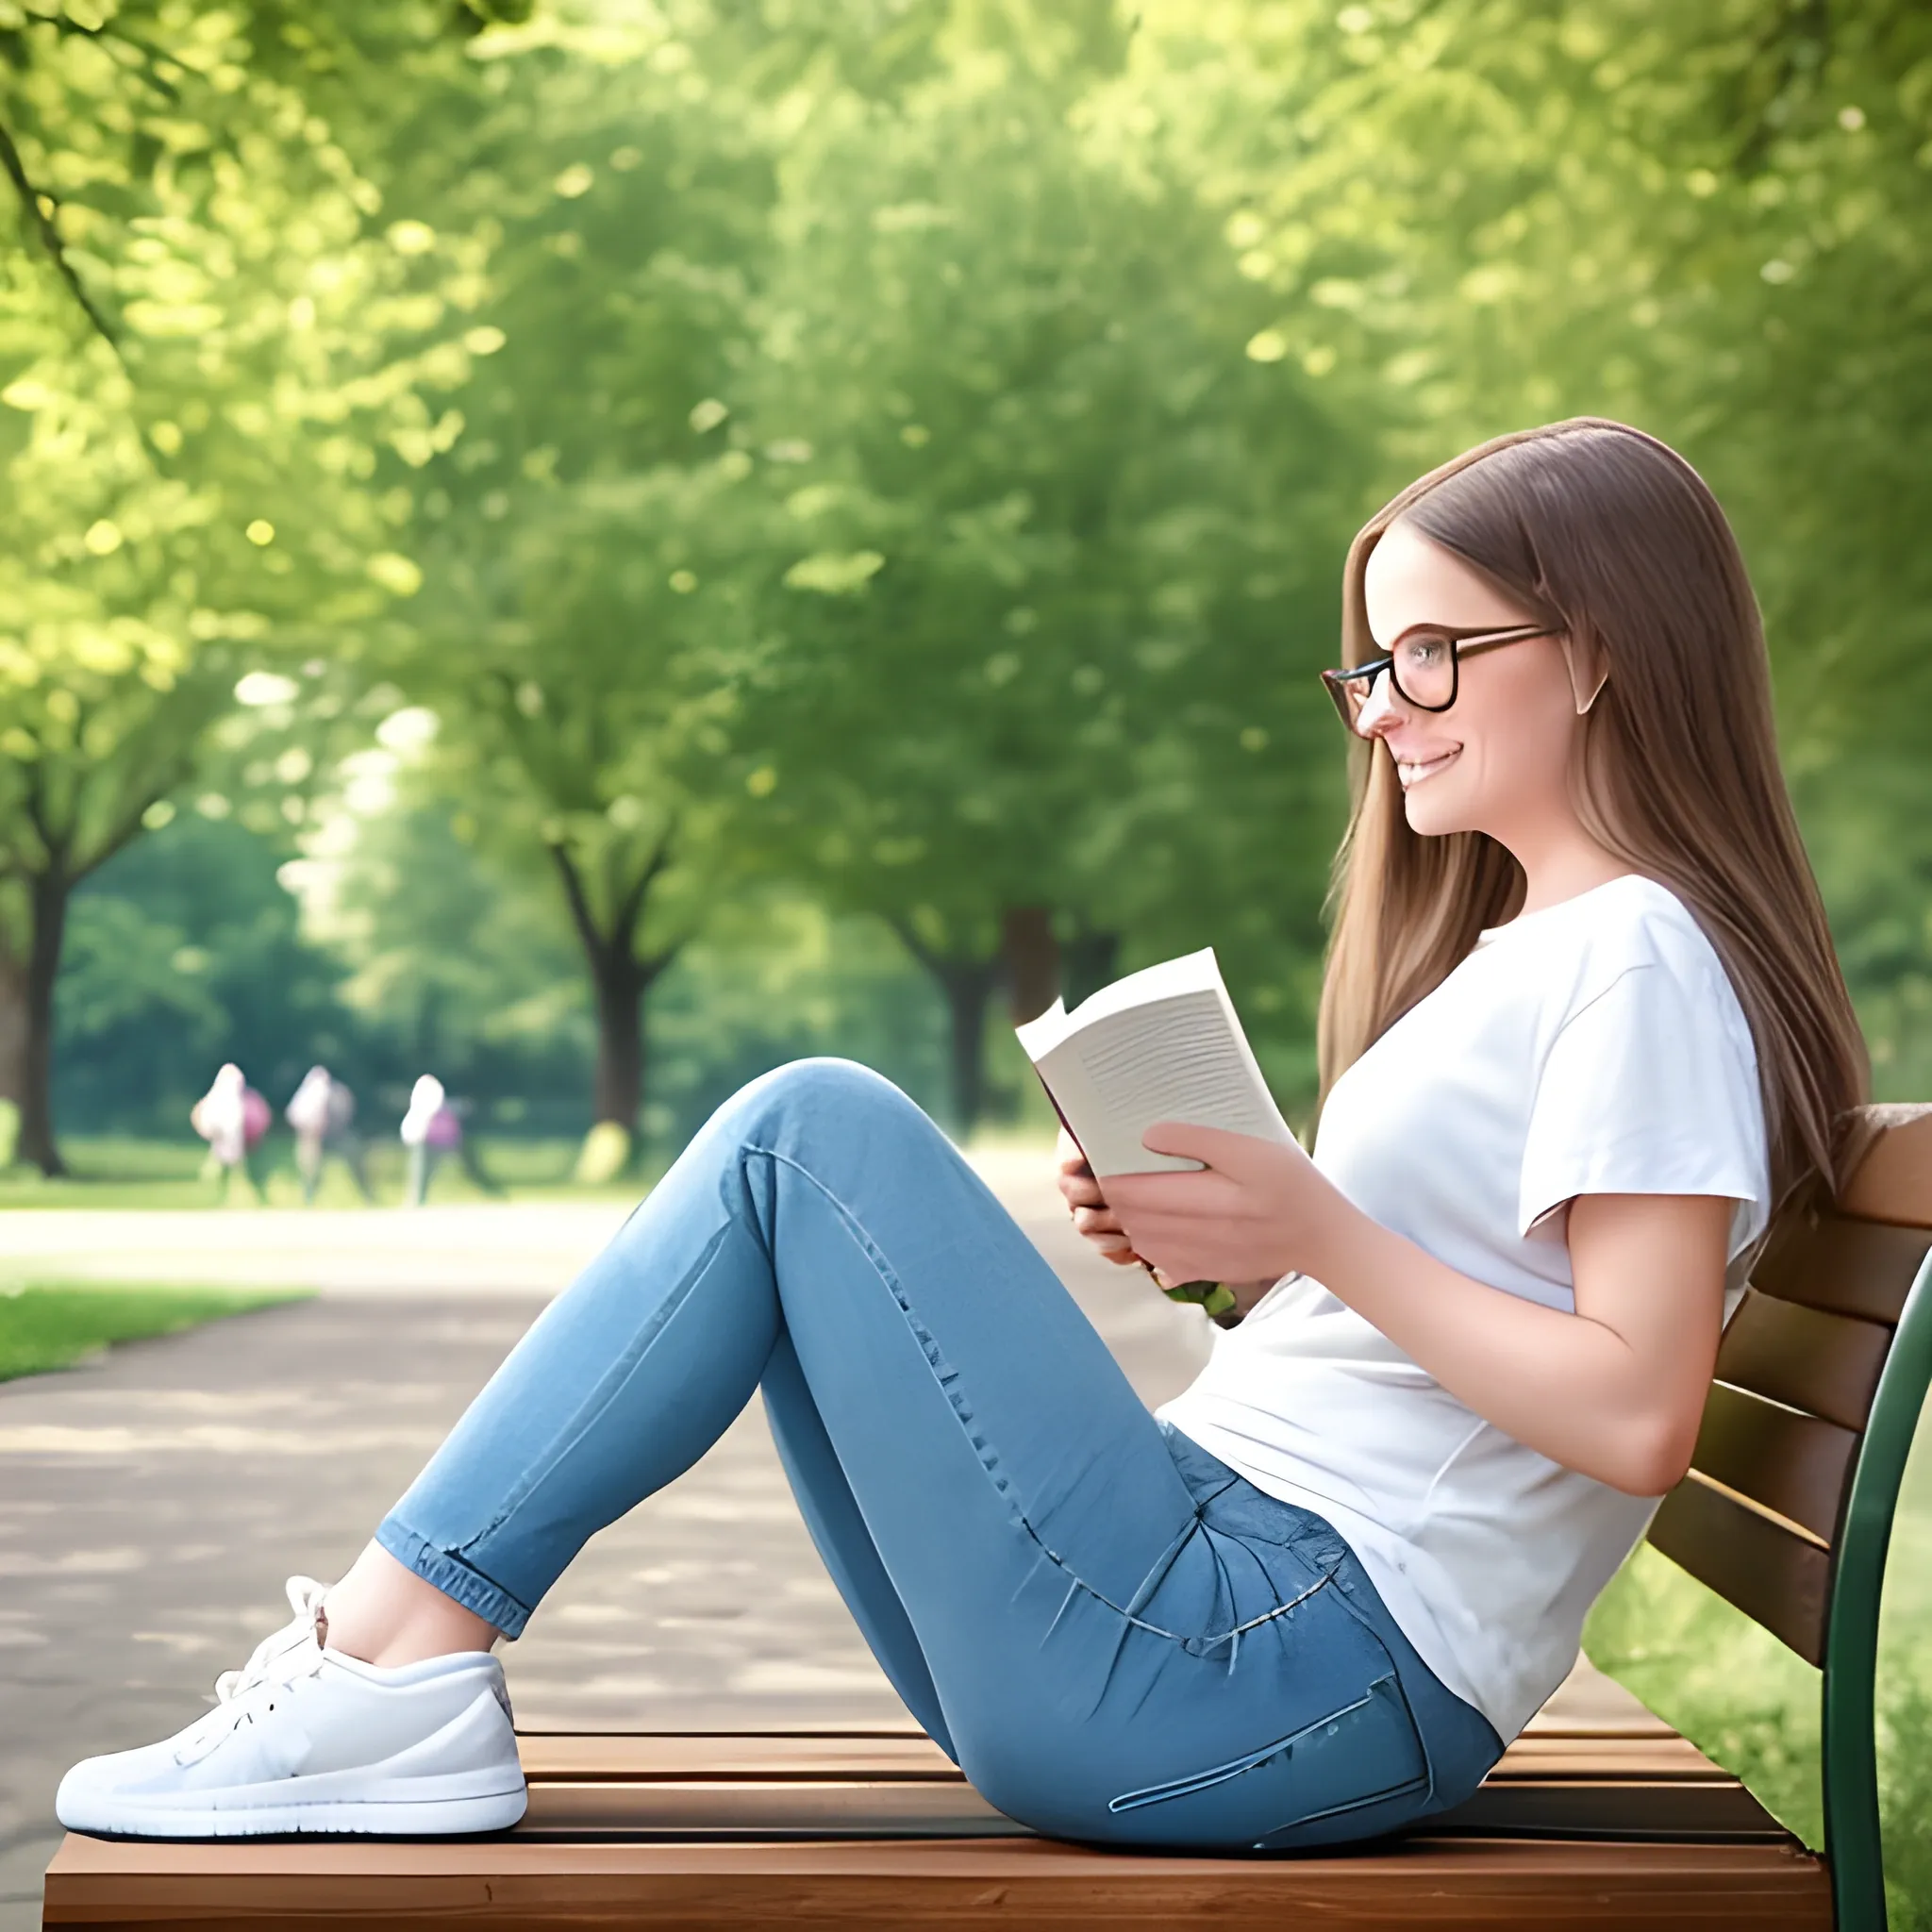 A woman is sitting on a bench in the park. She is wearing jeans, a white t-shirt, and sneakers. She has long, loose brown hair and wears glasses. She is reading a book and seems to be enjoying the reading. The sun is shining and there are birds singing in the trees. The park is full of people, but the woman seems to be in her own world. She is relaxed and happy.